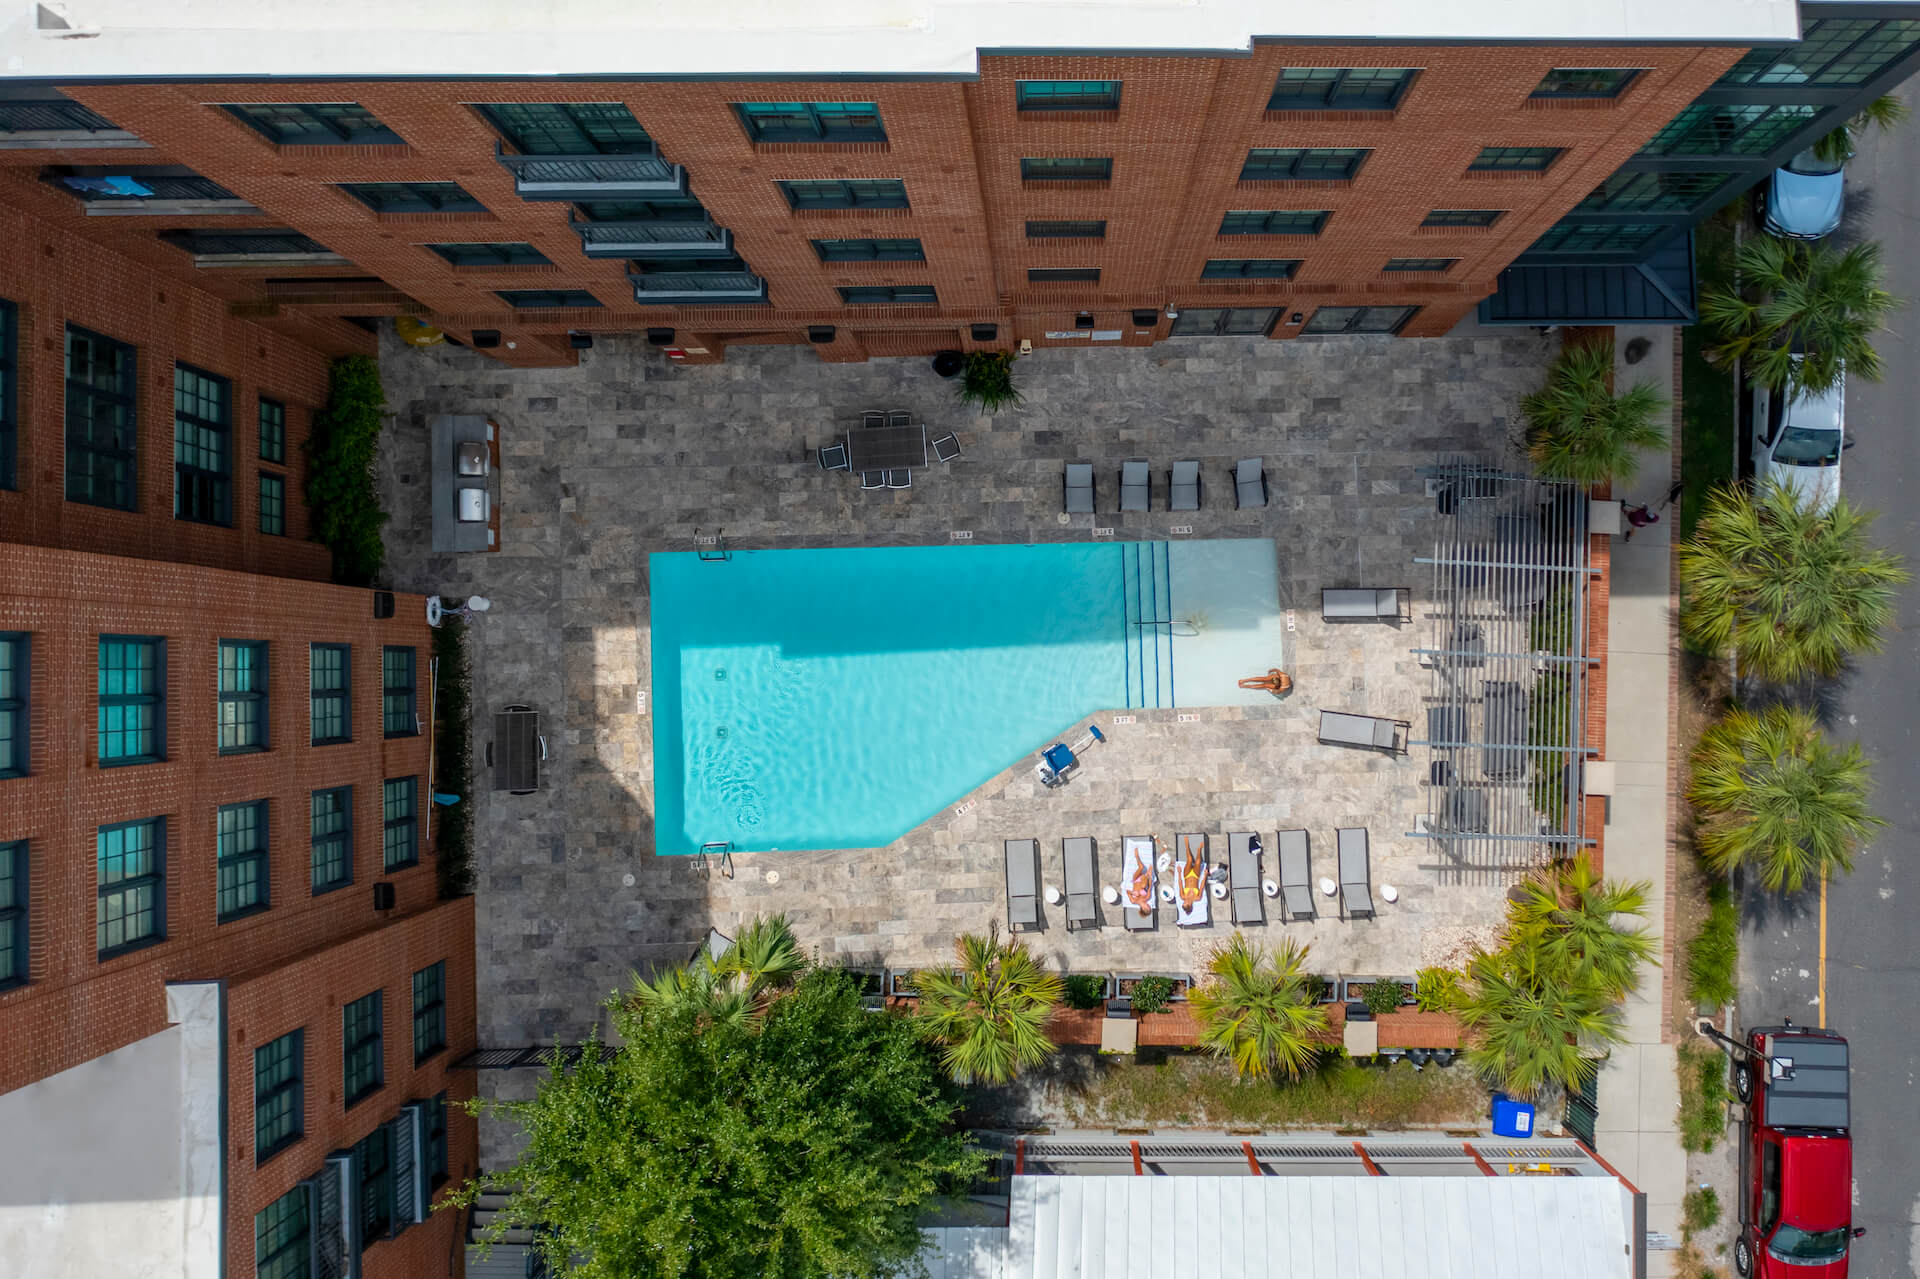 aerial view of the outdoor pool at summit place apartments